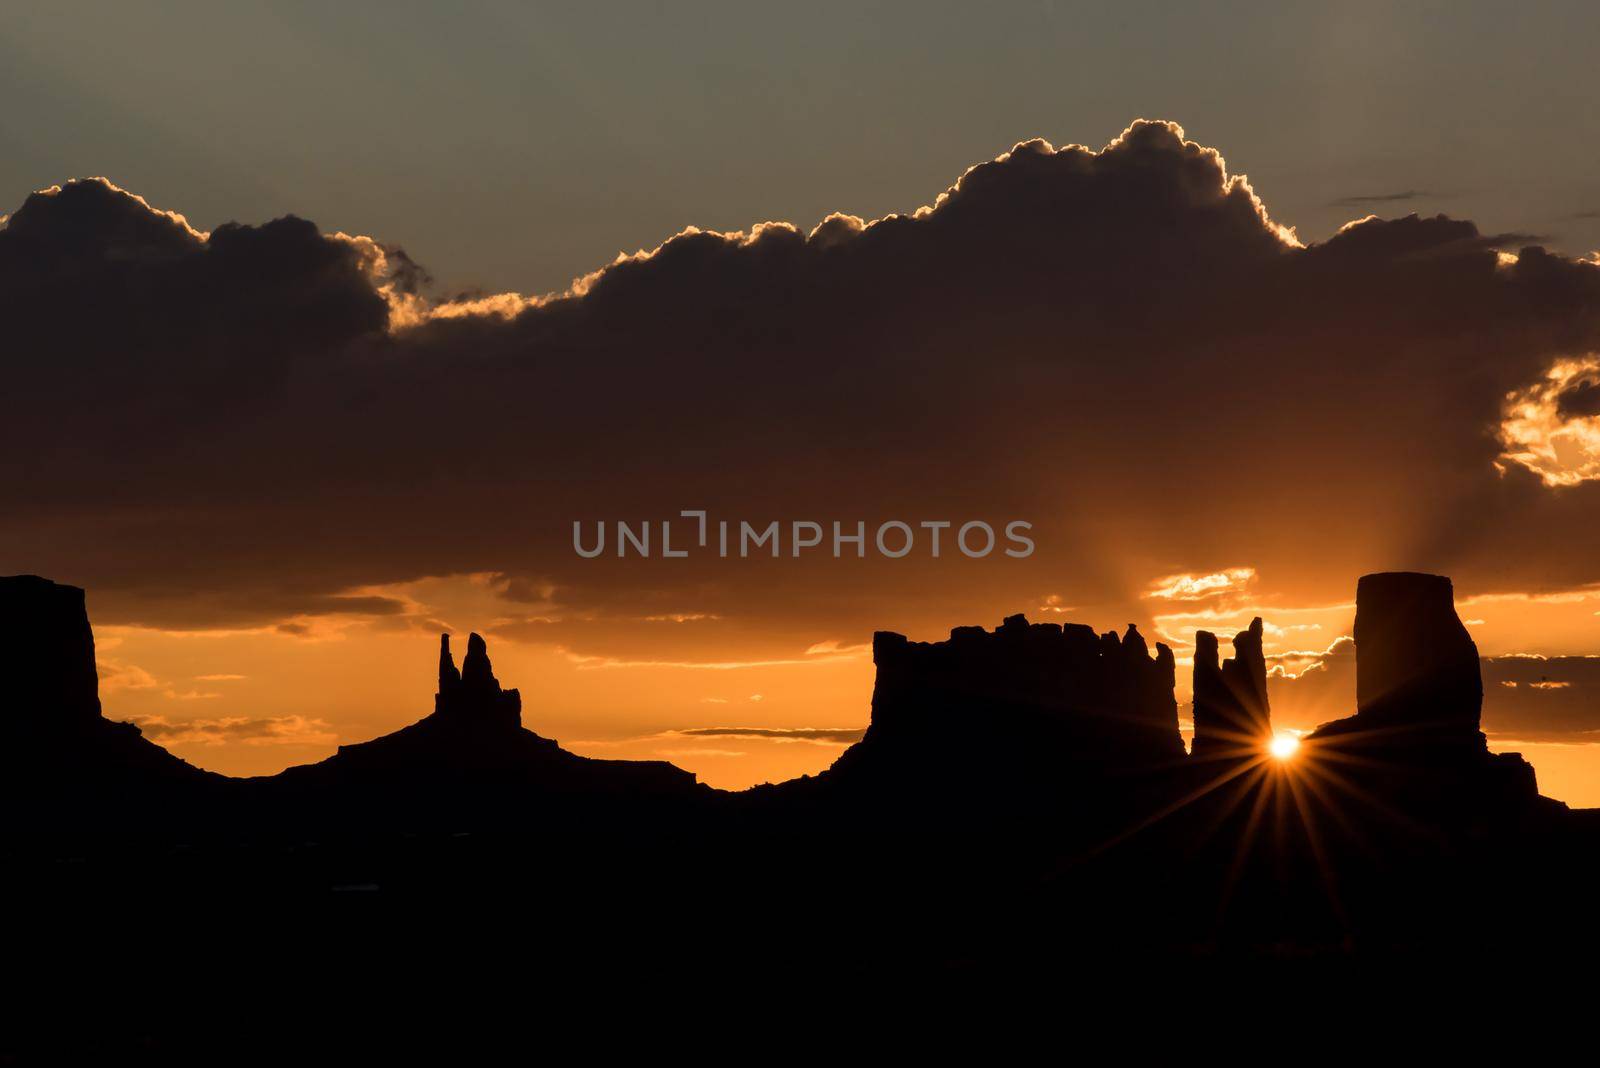 Artistic Utah Monument Valley mesa silhouettes at sunset by jyurinko